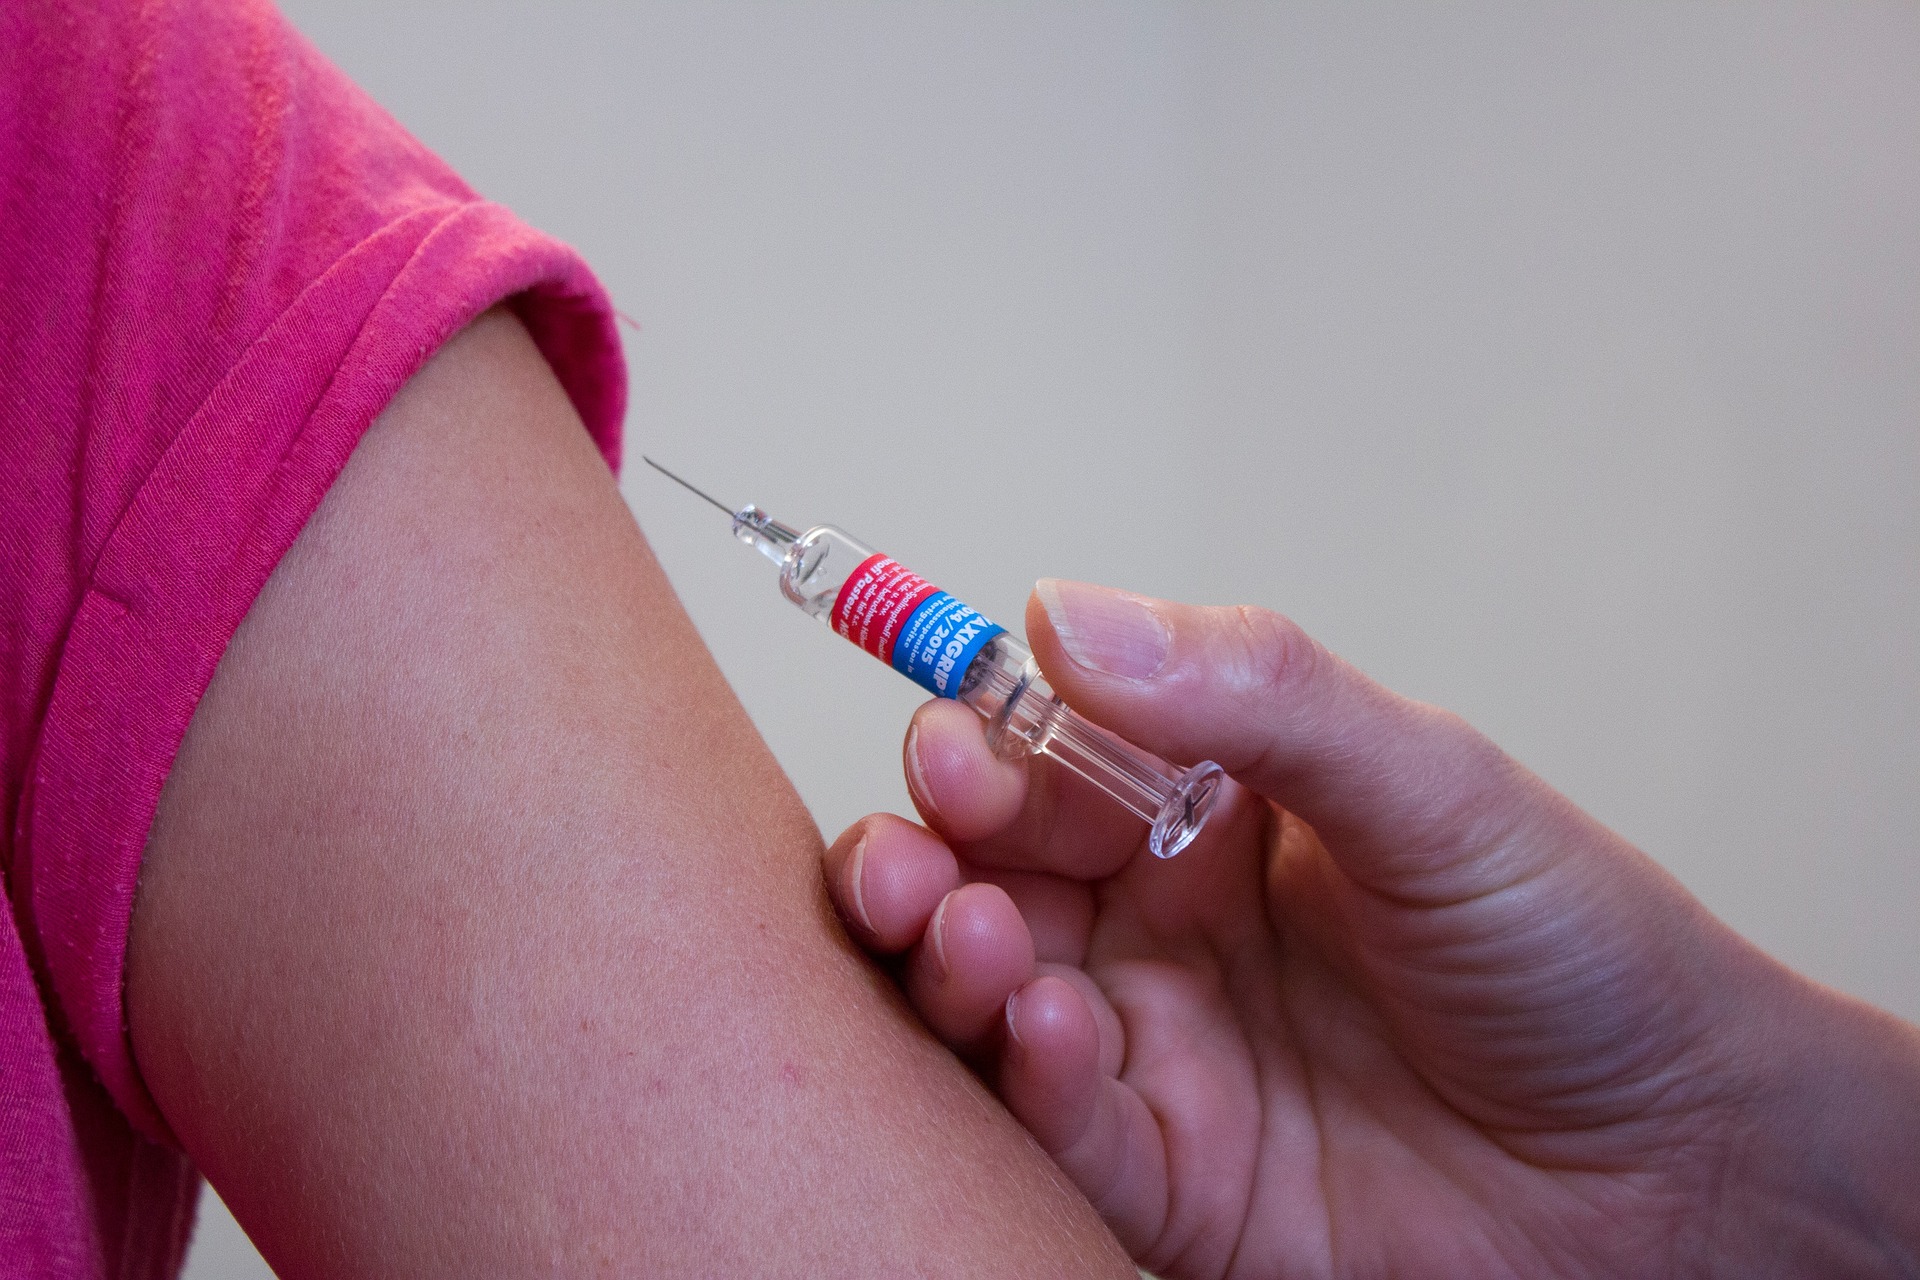 What to do after vaccination